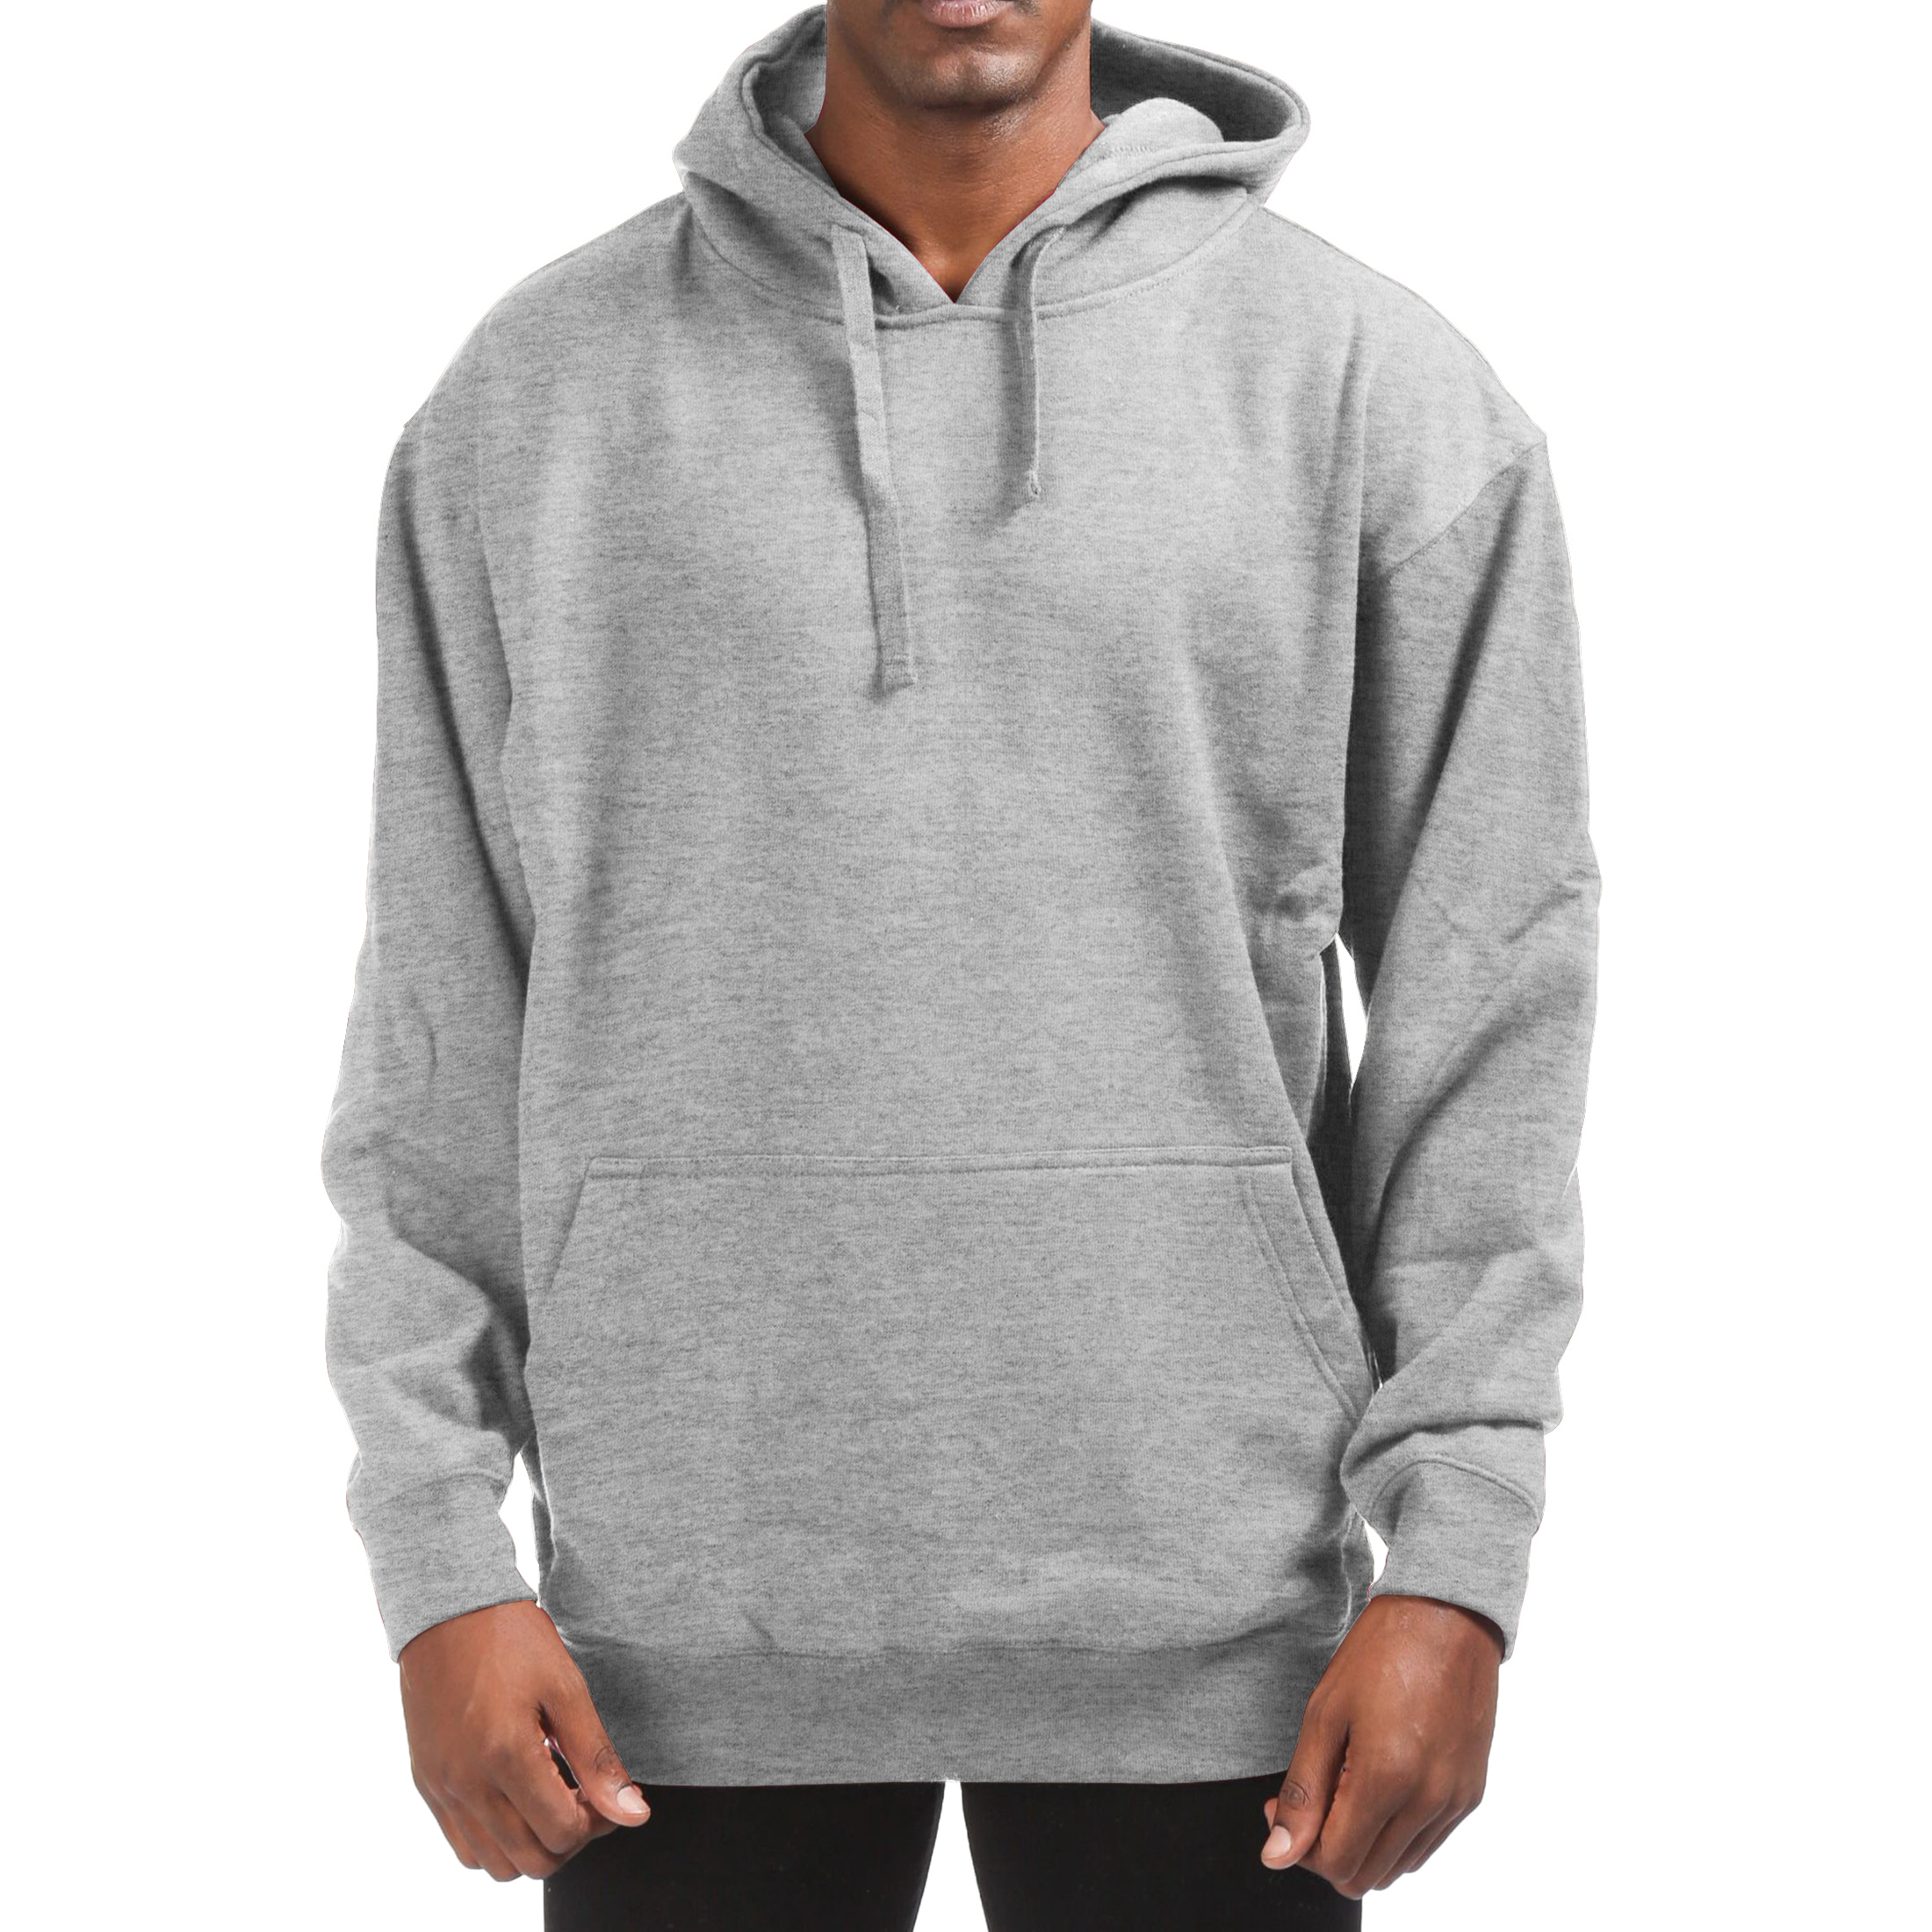 Men's Cotton-Blend Fleece Pullover Hoodie With Pocket (Big & Tall Sizes Available) - Gray, Small